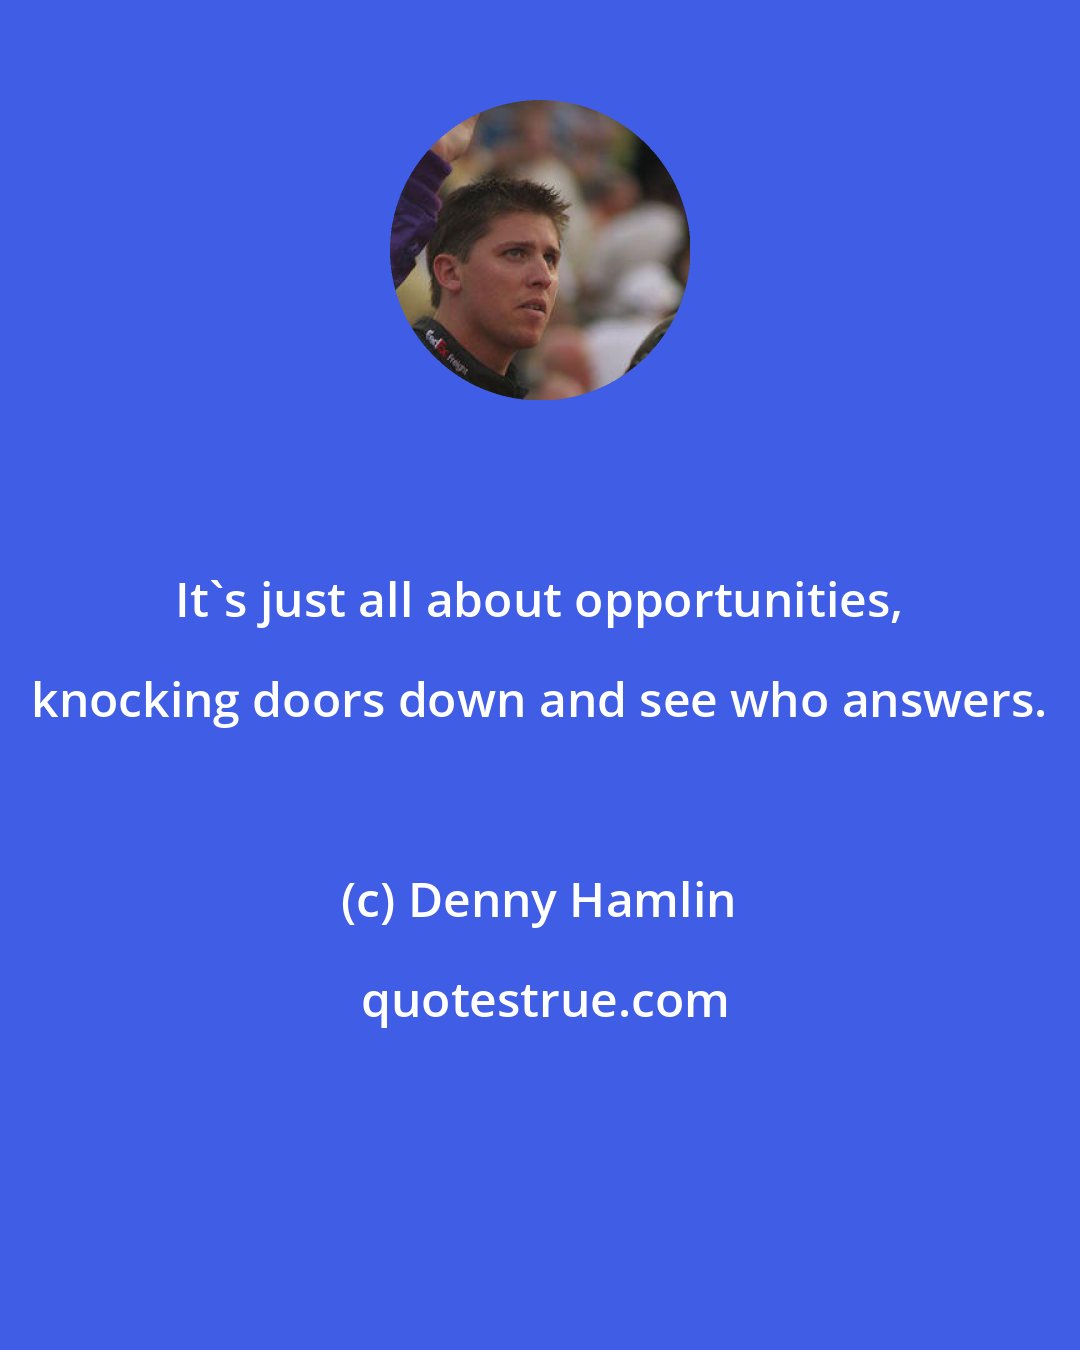 Denny Hamlin: It's just all about opportunities, knocking doors down and see who answers.